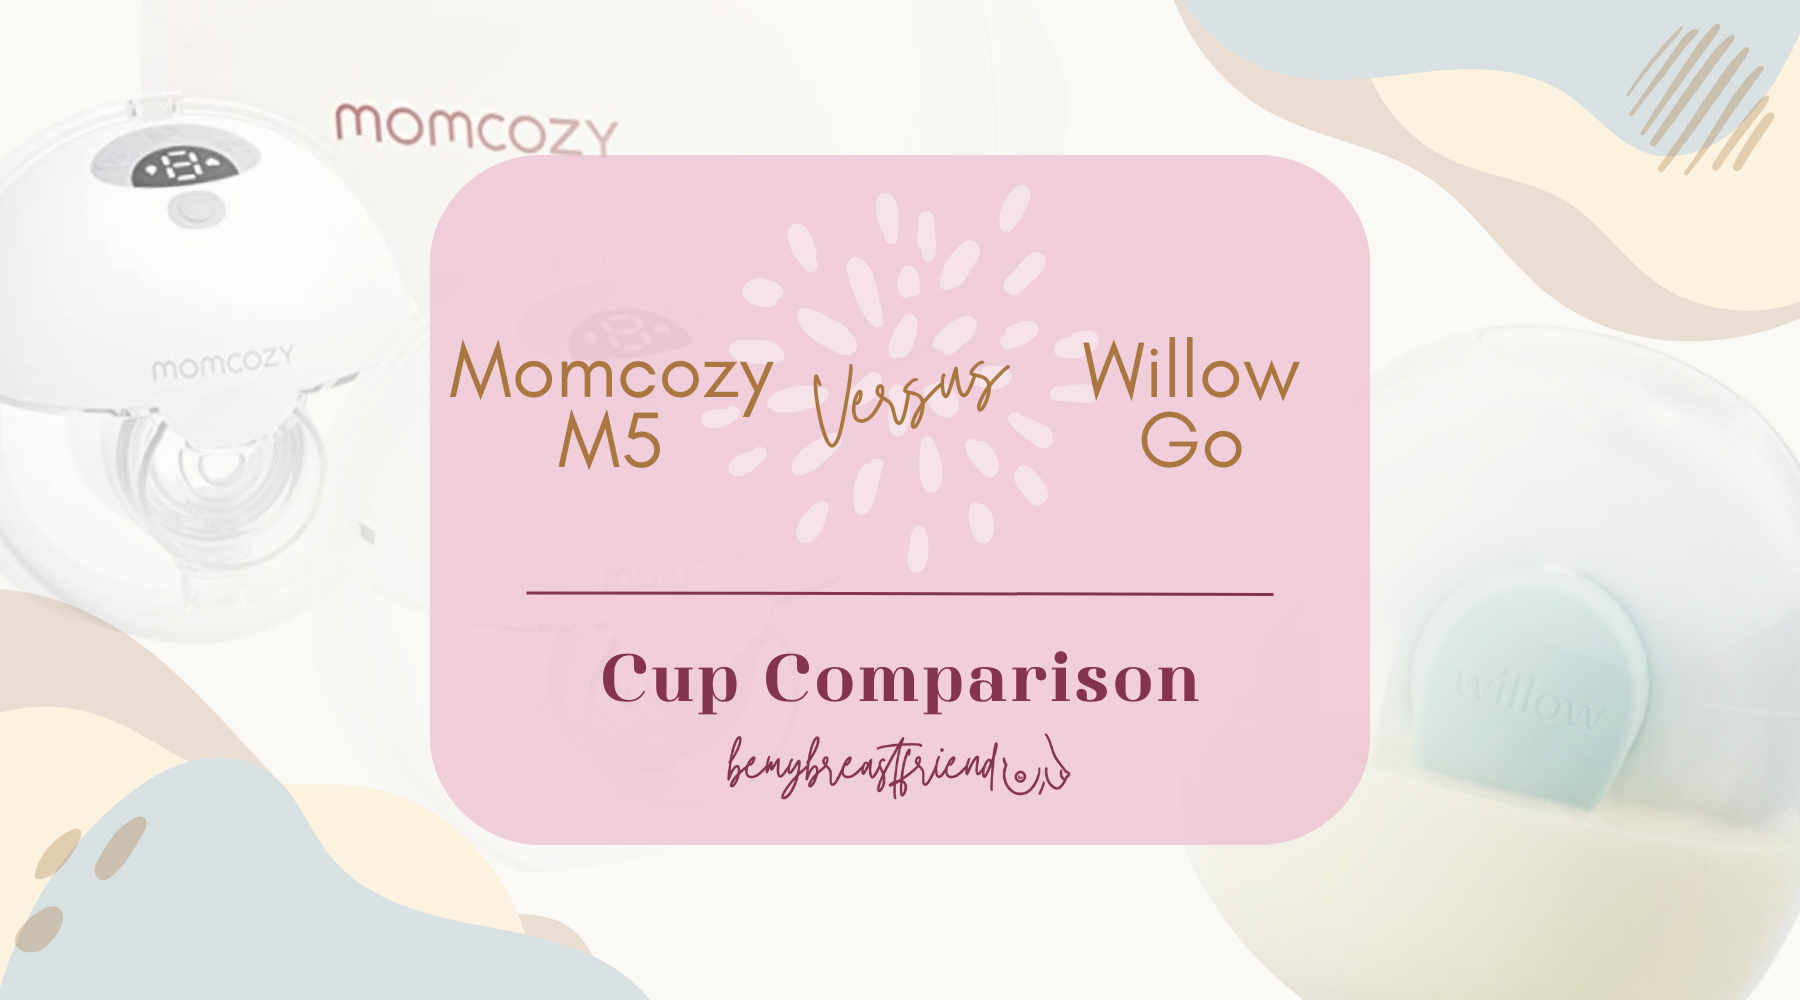 For those of you wondering how to take your momcozy m5 apart and how t